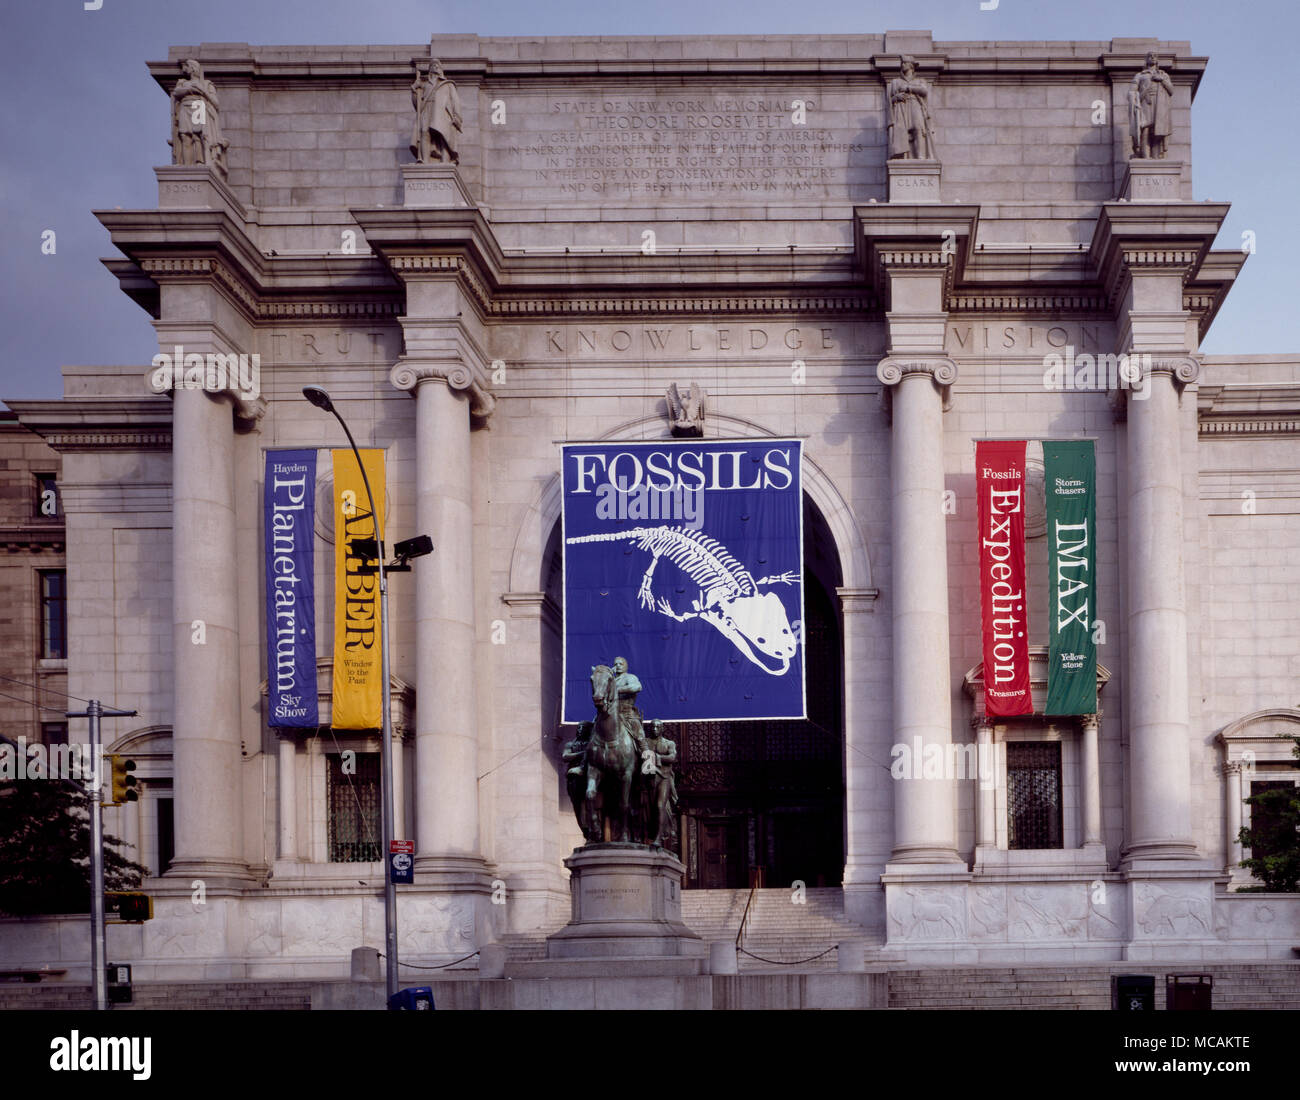 The American Museum of Natural History (abbreviated as AMNH), located on the Upper West Side of Manhattan, in New York City is one of the largest and most celebrated museums in the world. Located in park-like grounds across the street from Central Park, the museum complex contains 27 interconnected buildings housing 45 permanent exhibition halls, in addition to a planetarium and a library. The museum collections contain over 32 million specimens of plants, humans, animals, fossils, minerals, rocks, meteorites, and human cultural artifacts, of which only a small fraction can be displayed at any Stock Photo